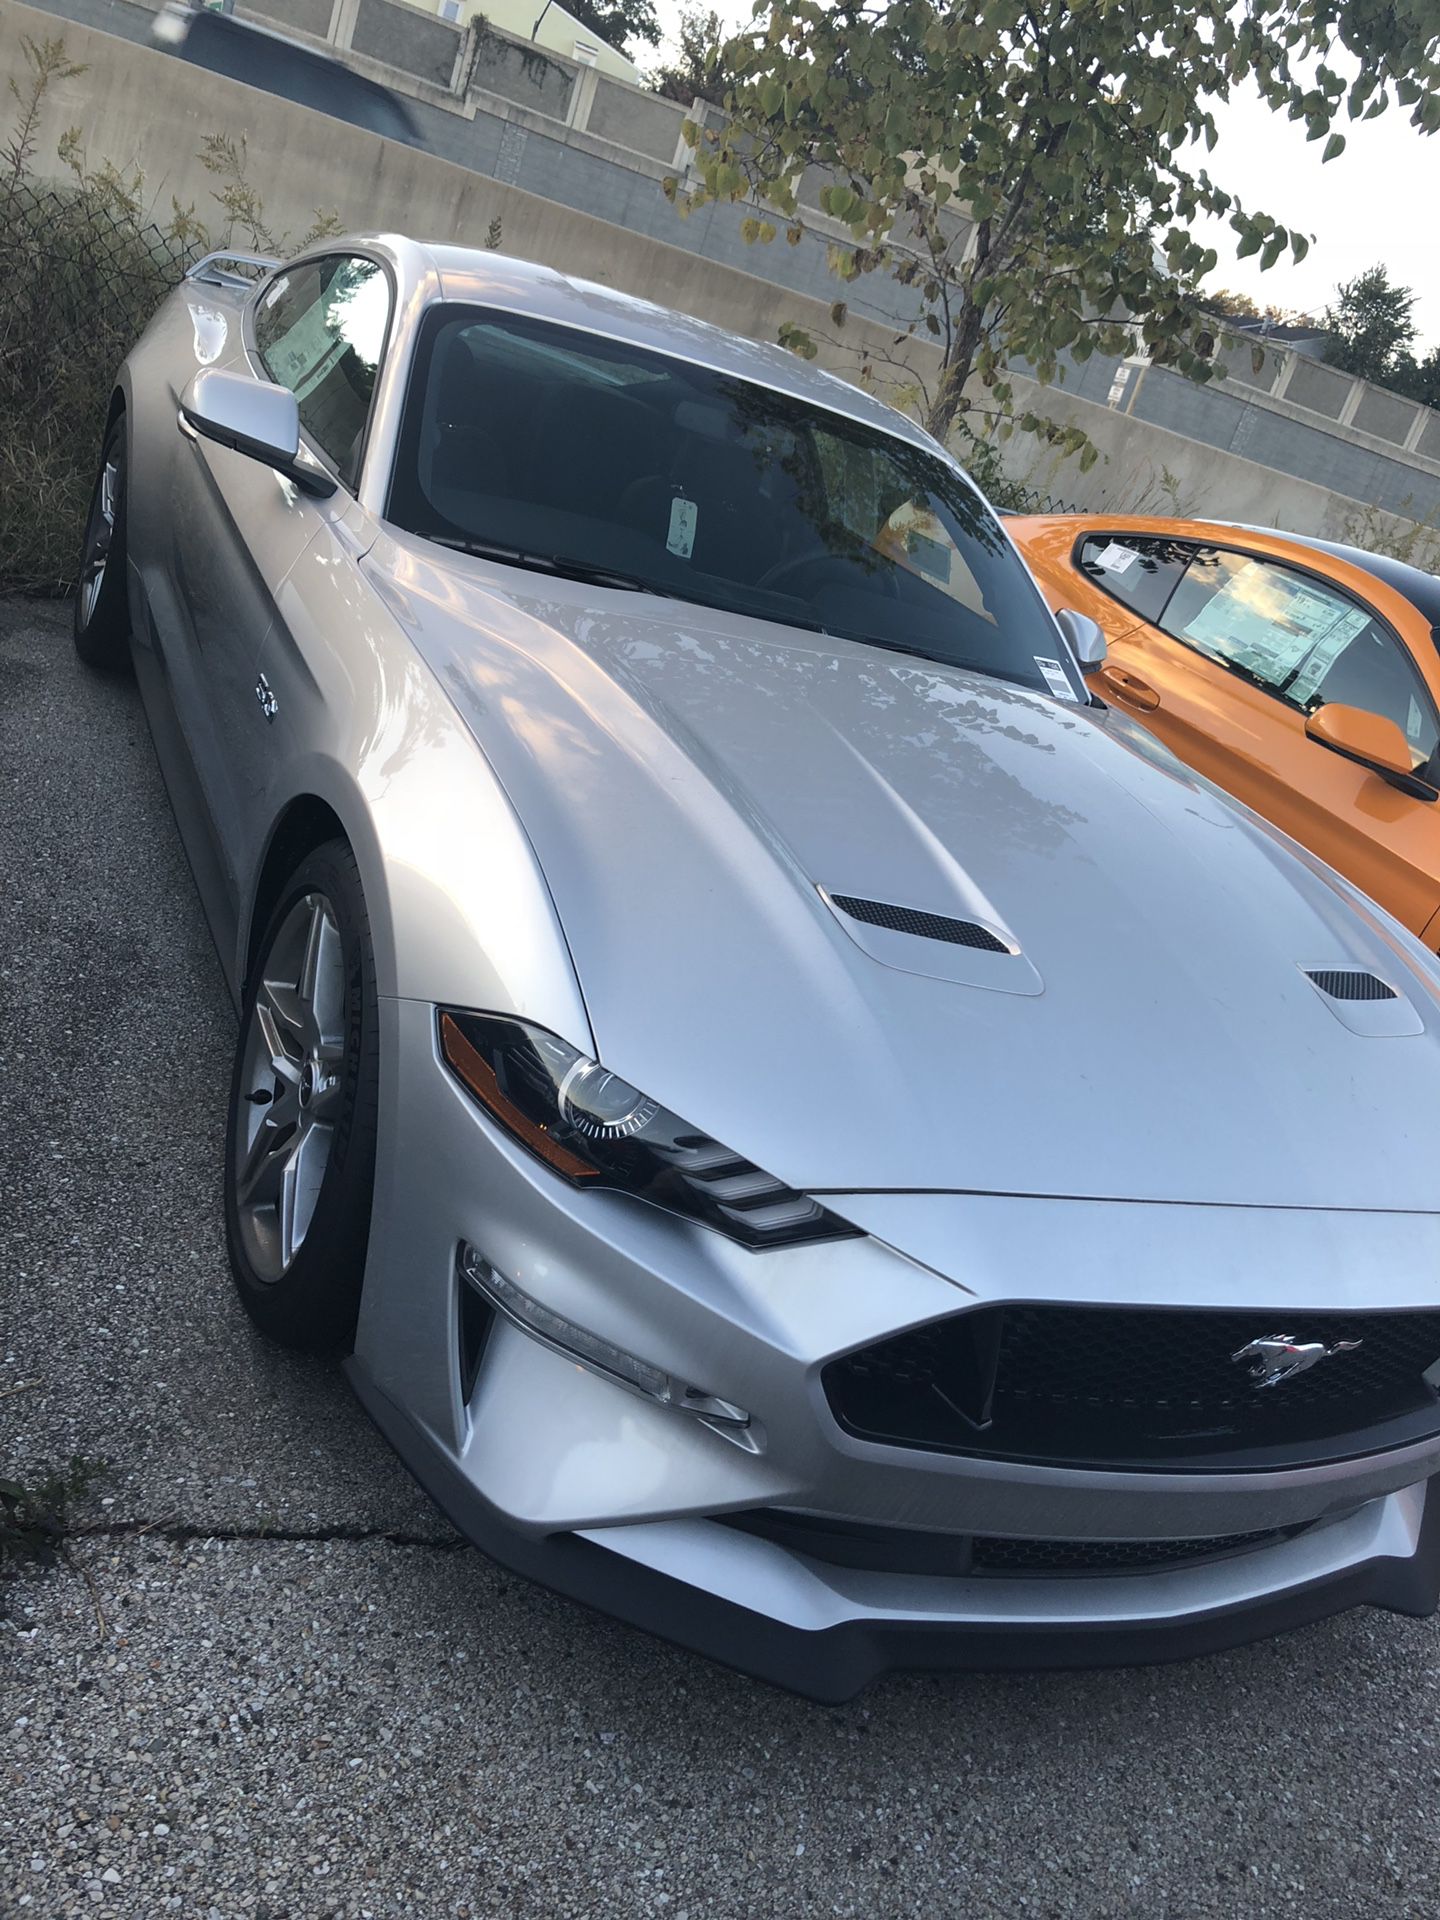 2018 Ford Mustang GT $35,655 *We Do Finance*